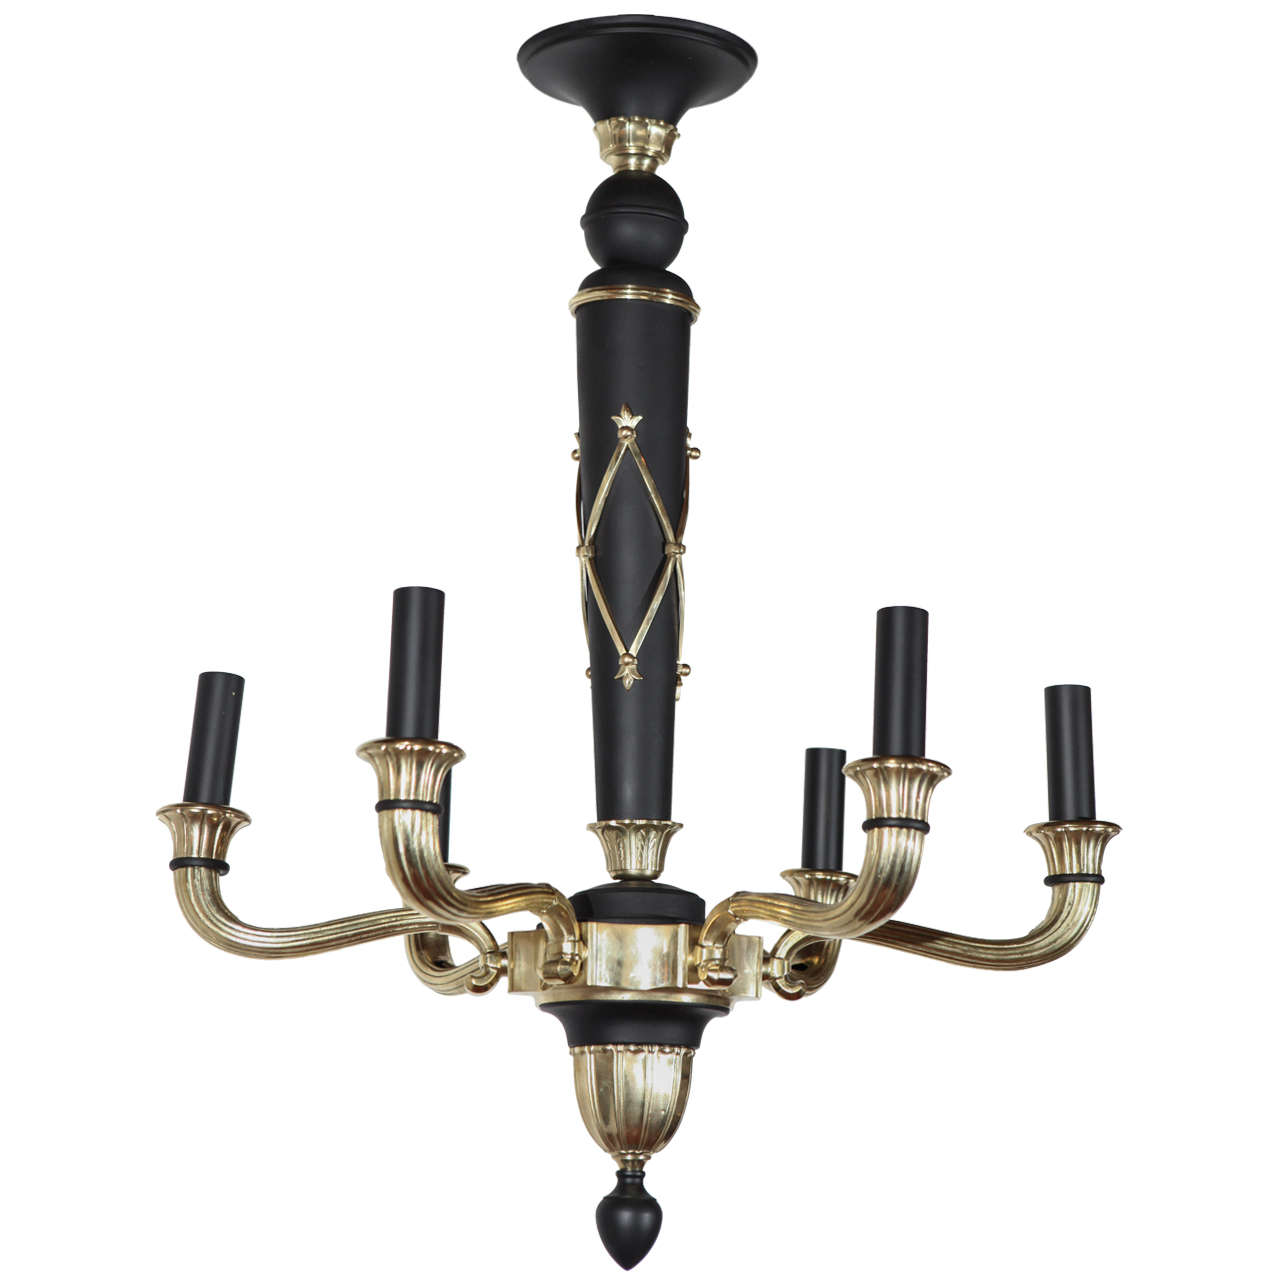 French Regency Revival Style Chandelier For Sale